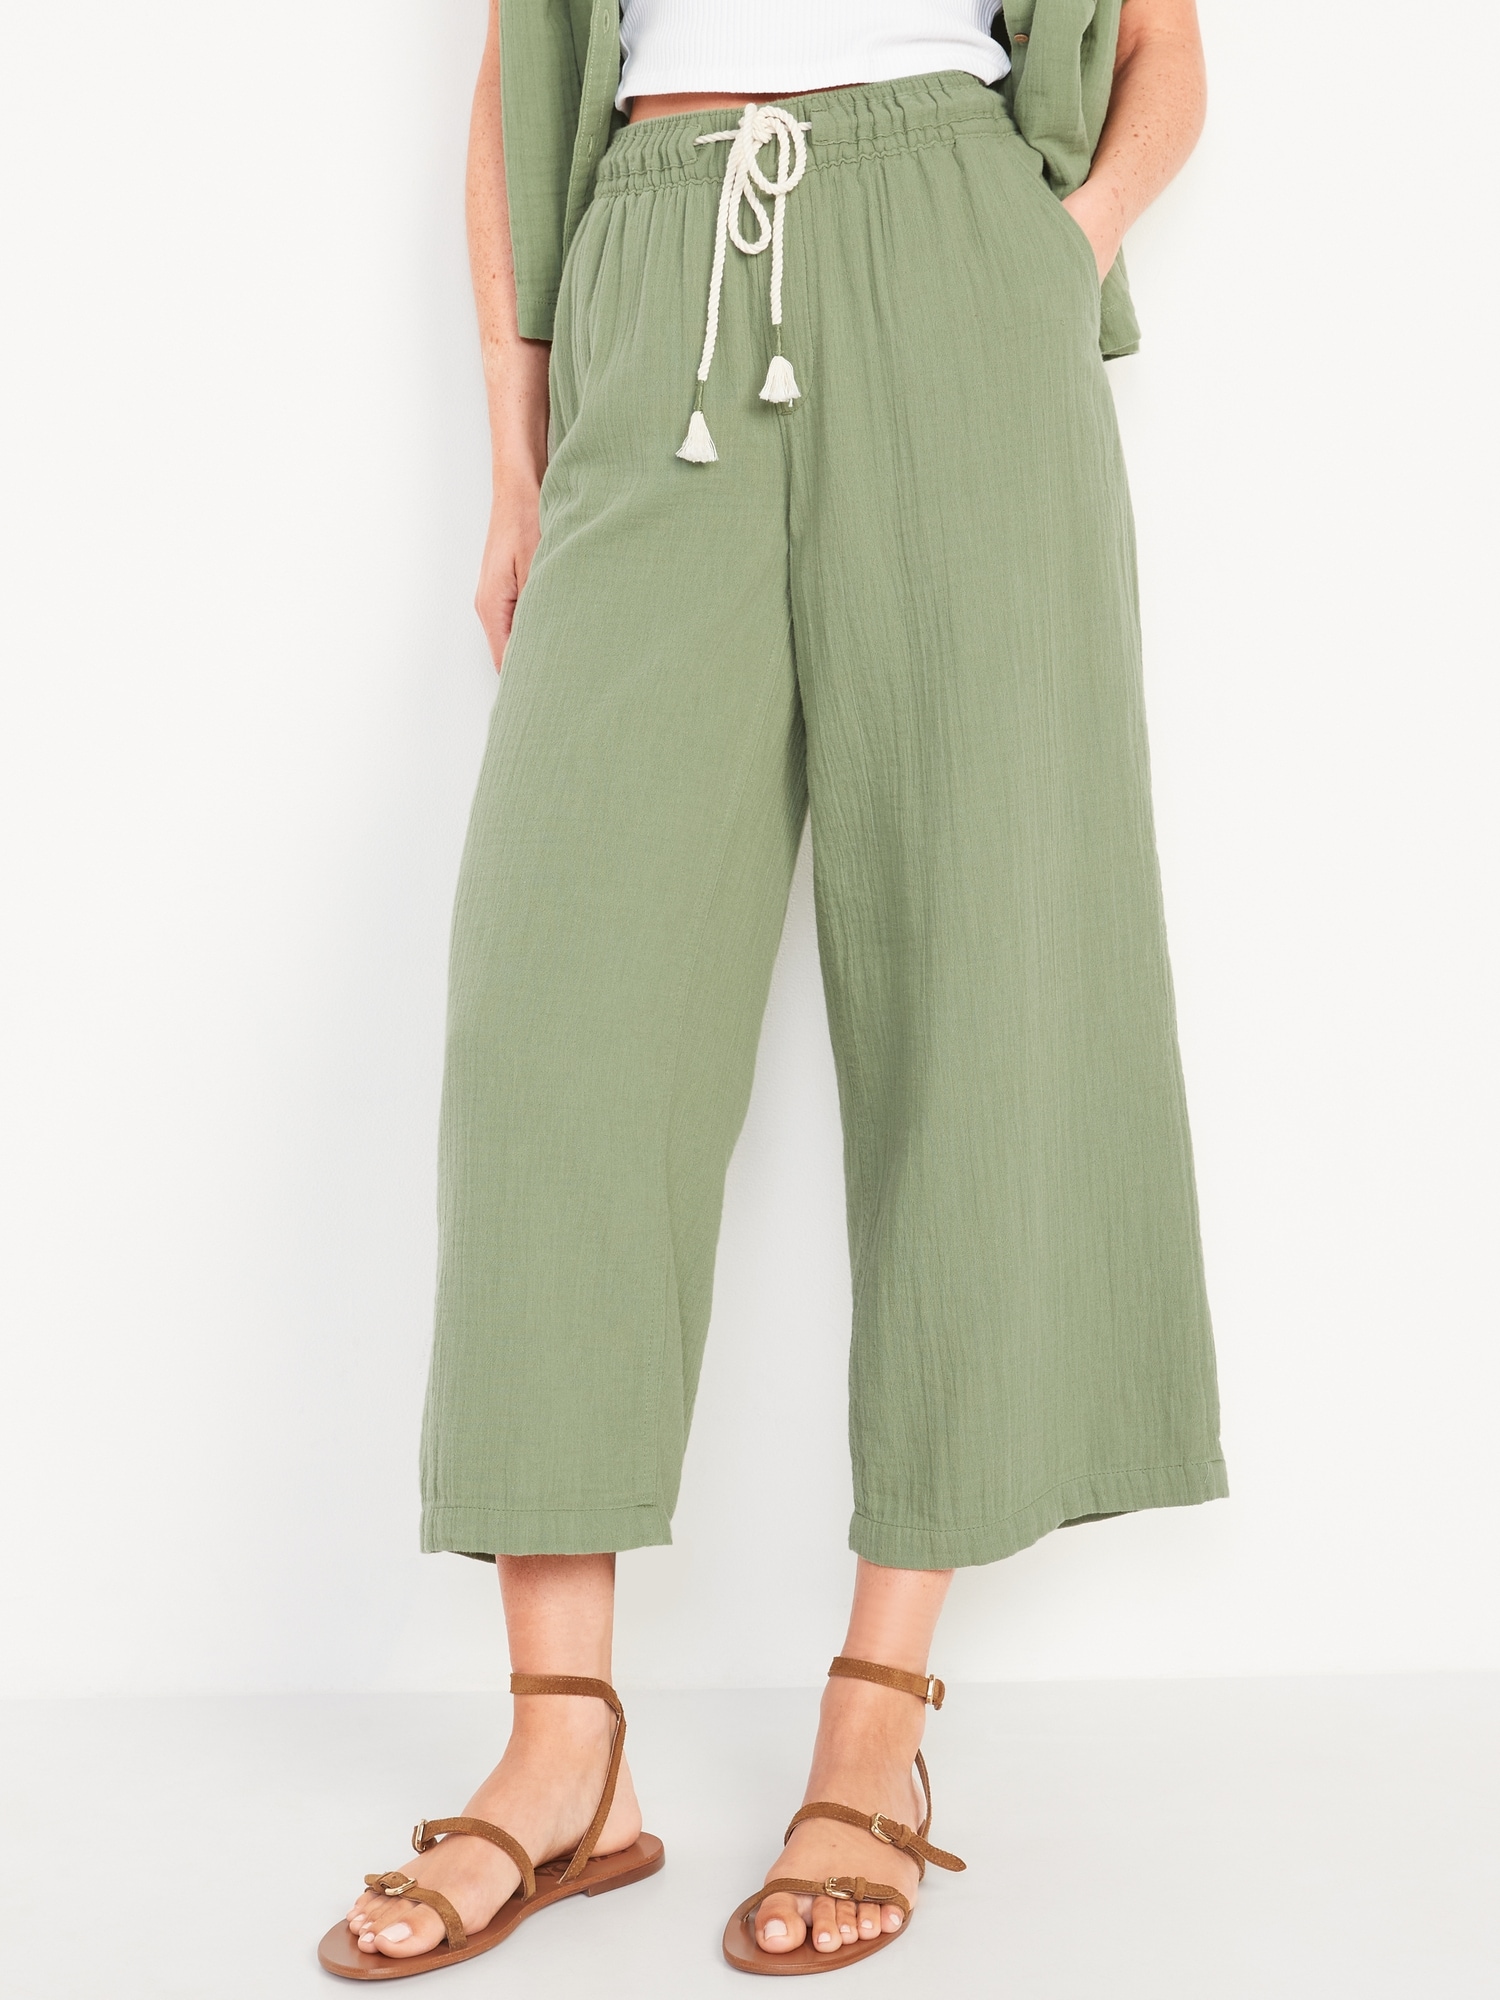 Women's Ultra-Soft Bamboo Wide Leg Pull-On Pants | Cozy Earth